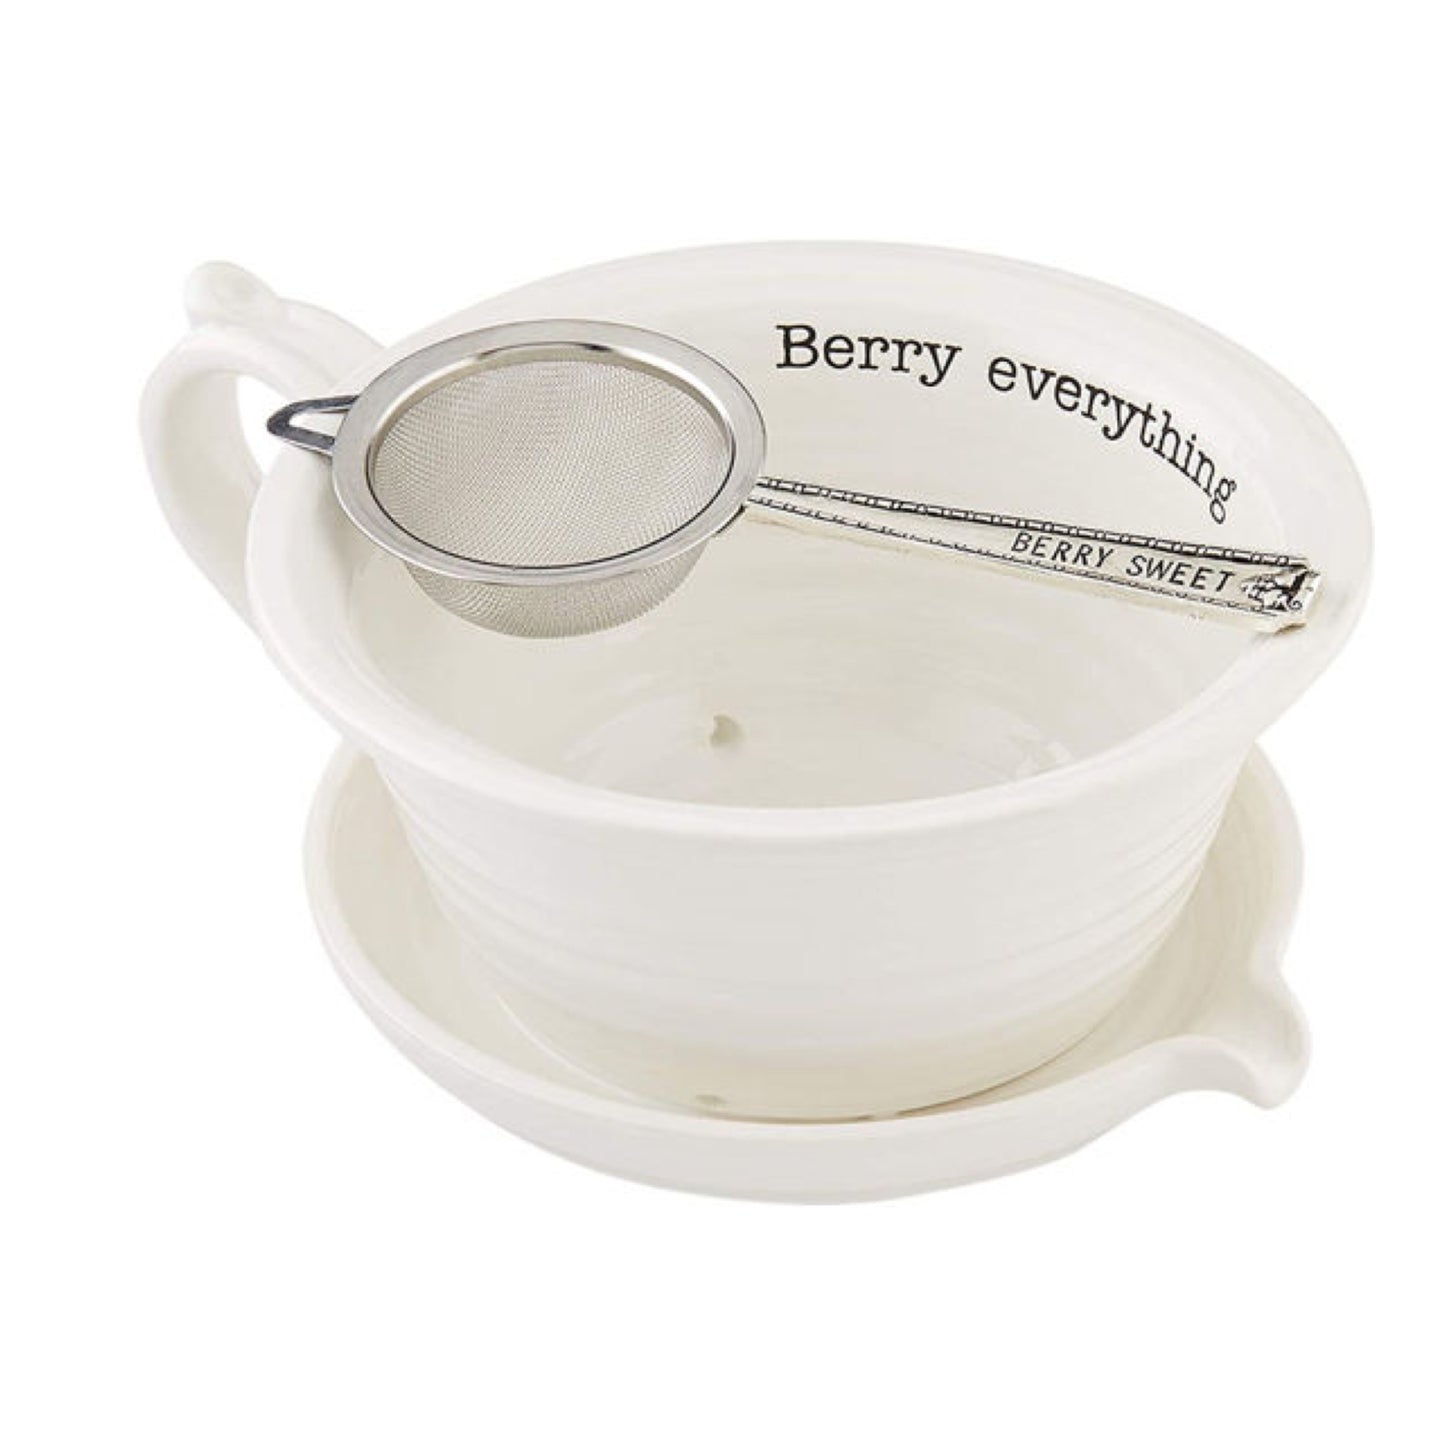 Berry Everything Strainer